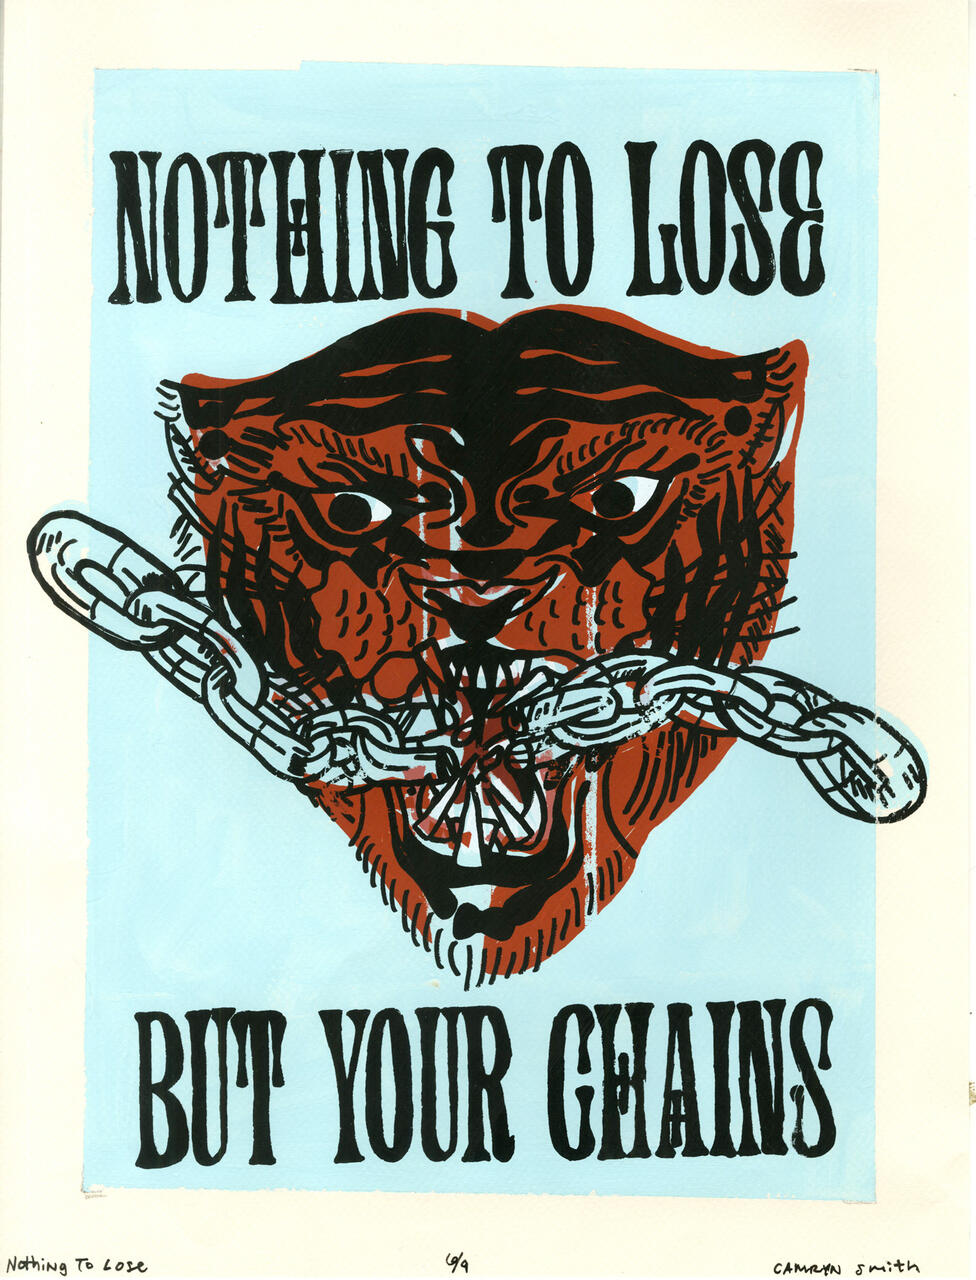 Nothing to Lose screenprinted poster by Camryn Smith